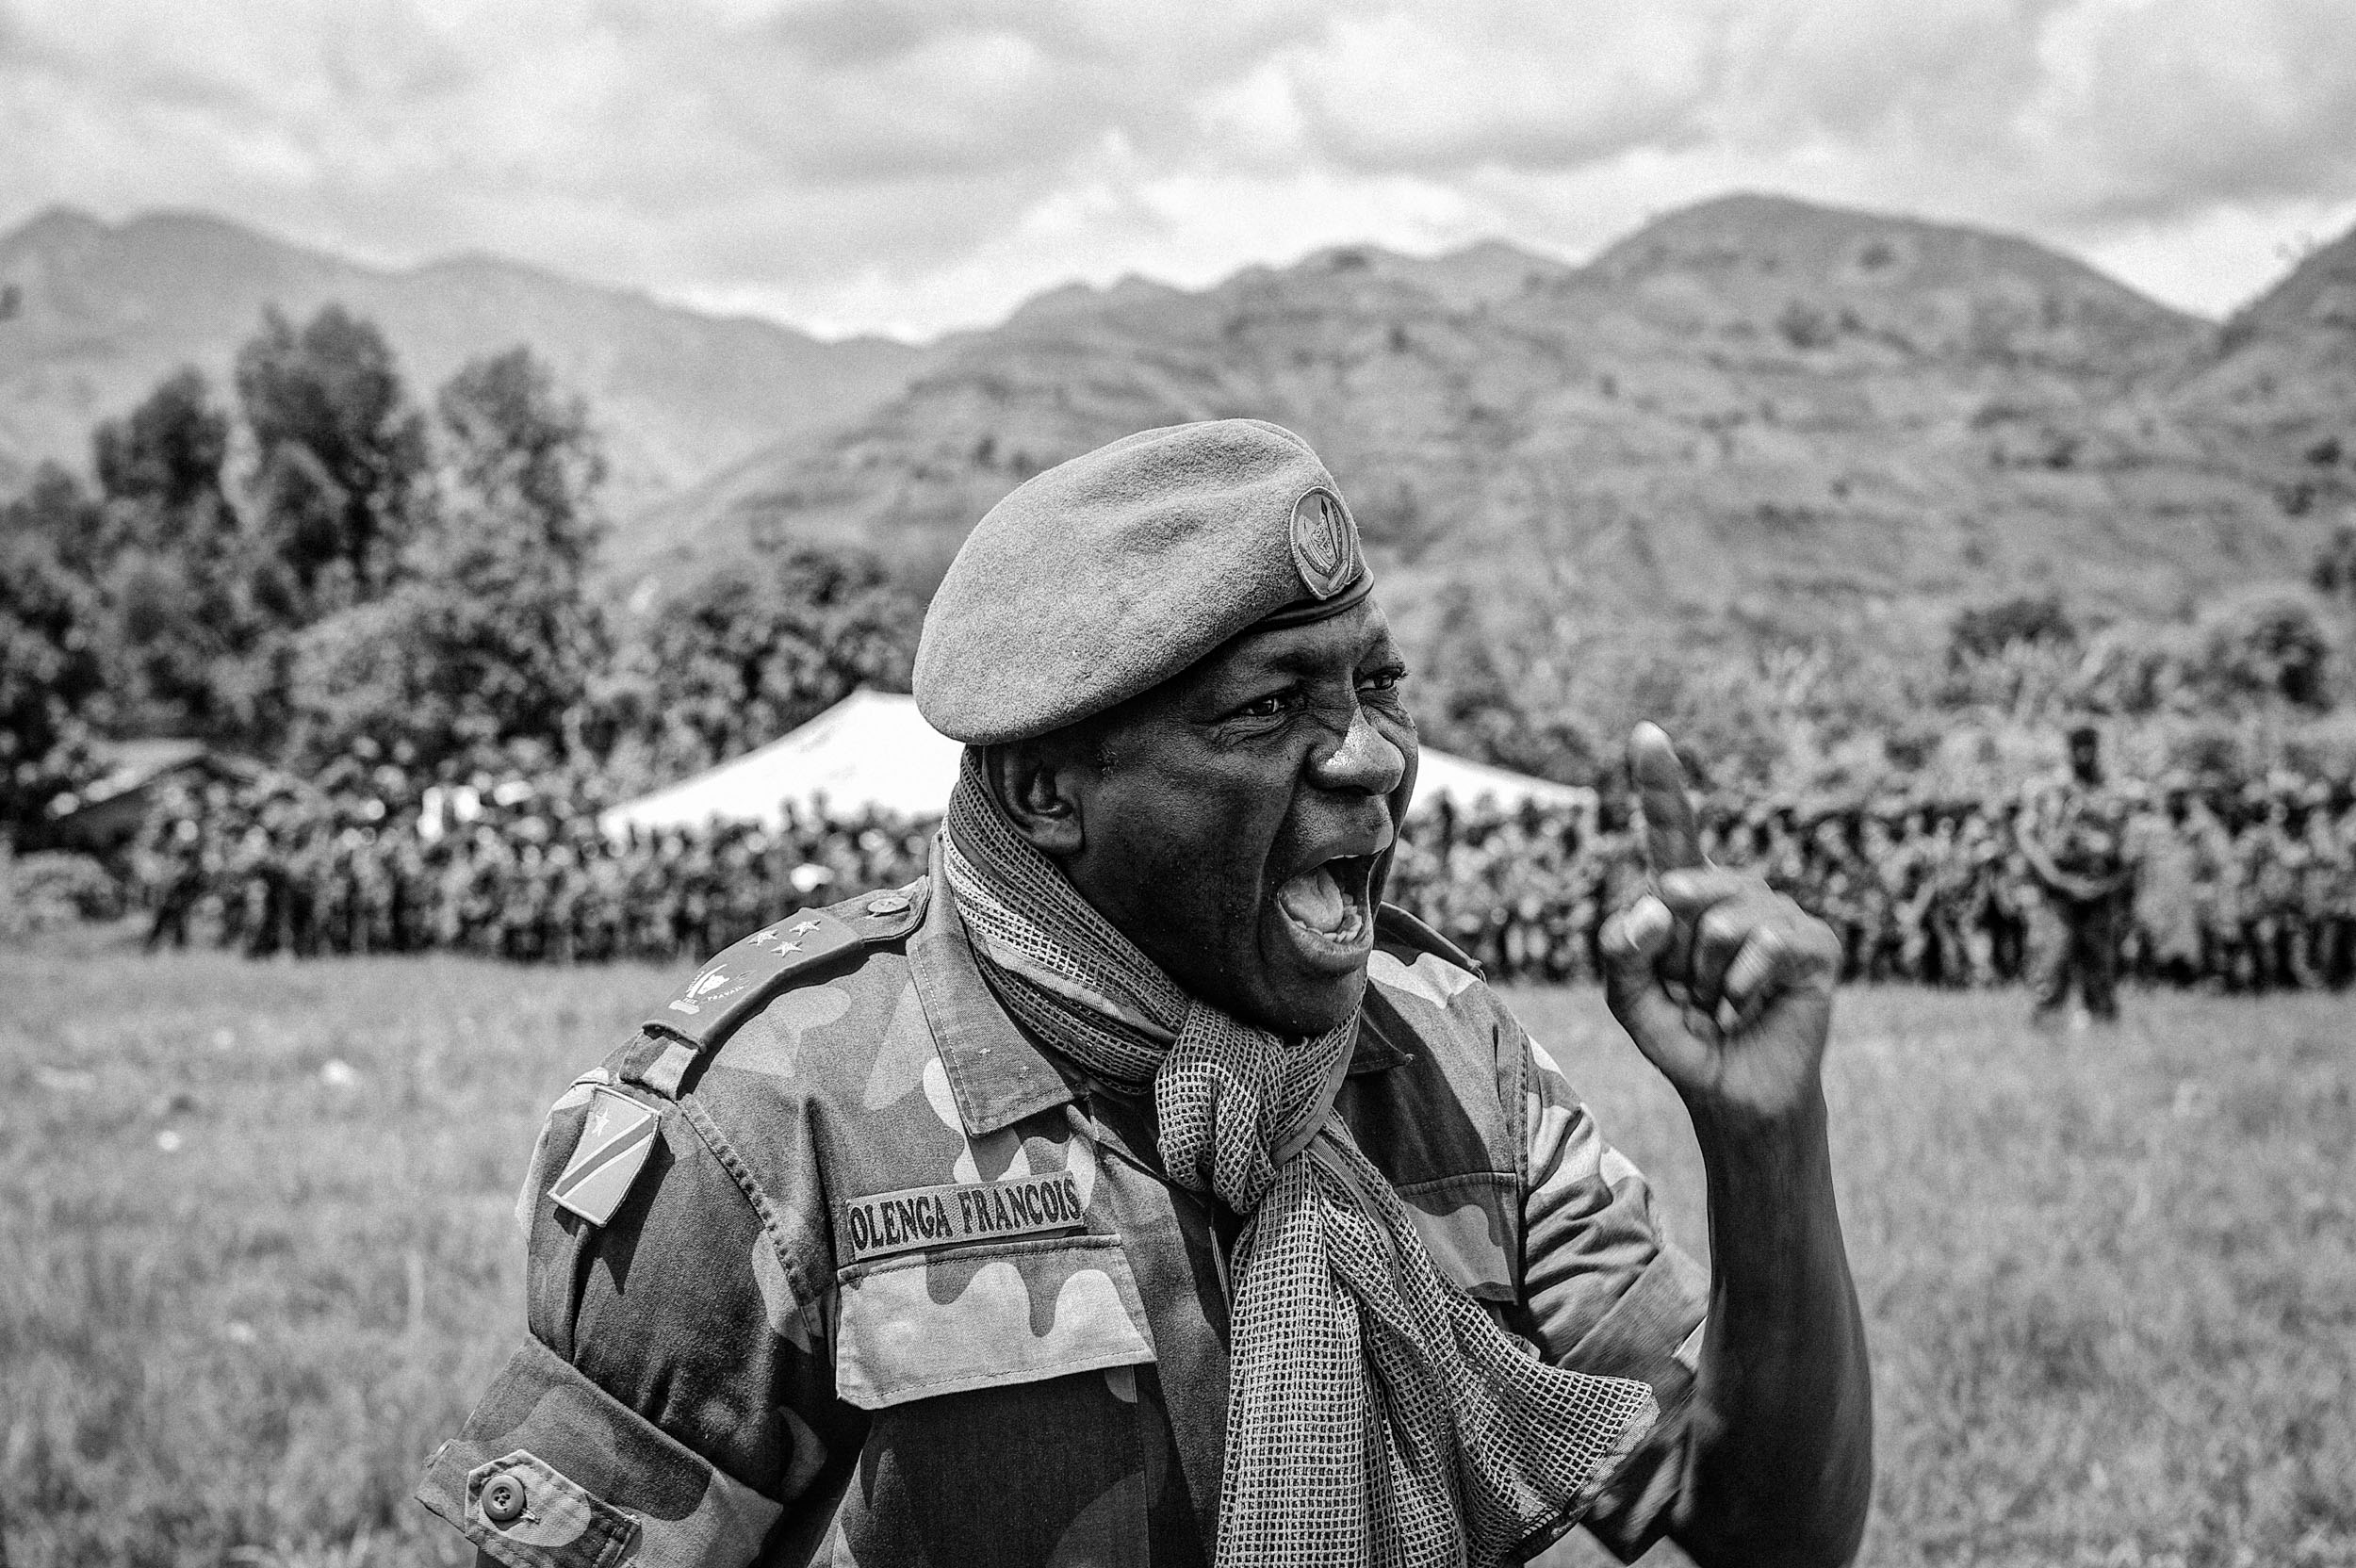  General Francois Olenga flew in a helicopter to the retreated position of his troops, the Armed Forces of the Democratic Republic of the Congo, near Lake Kivu in eastern DRC. There he led a rally, surrounded by thousands of his troops on a large fie